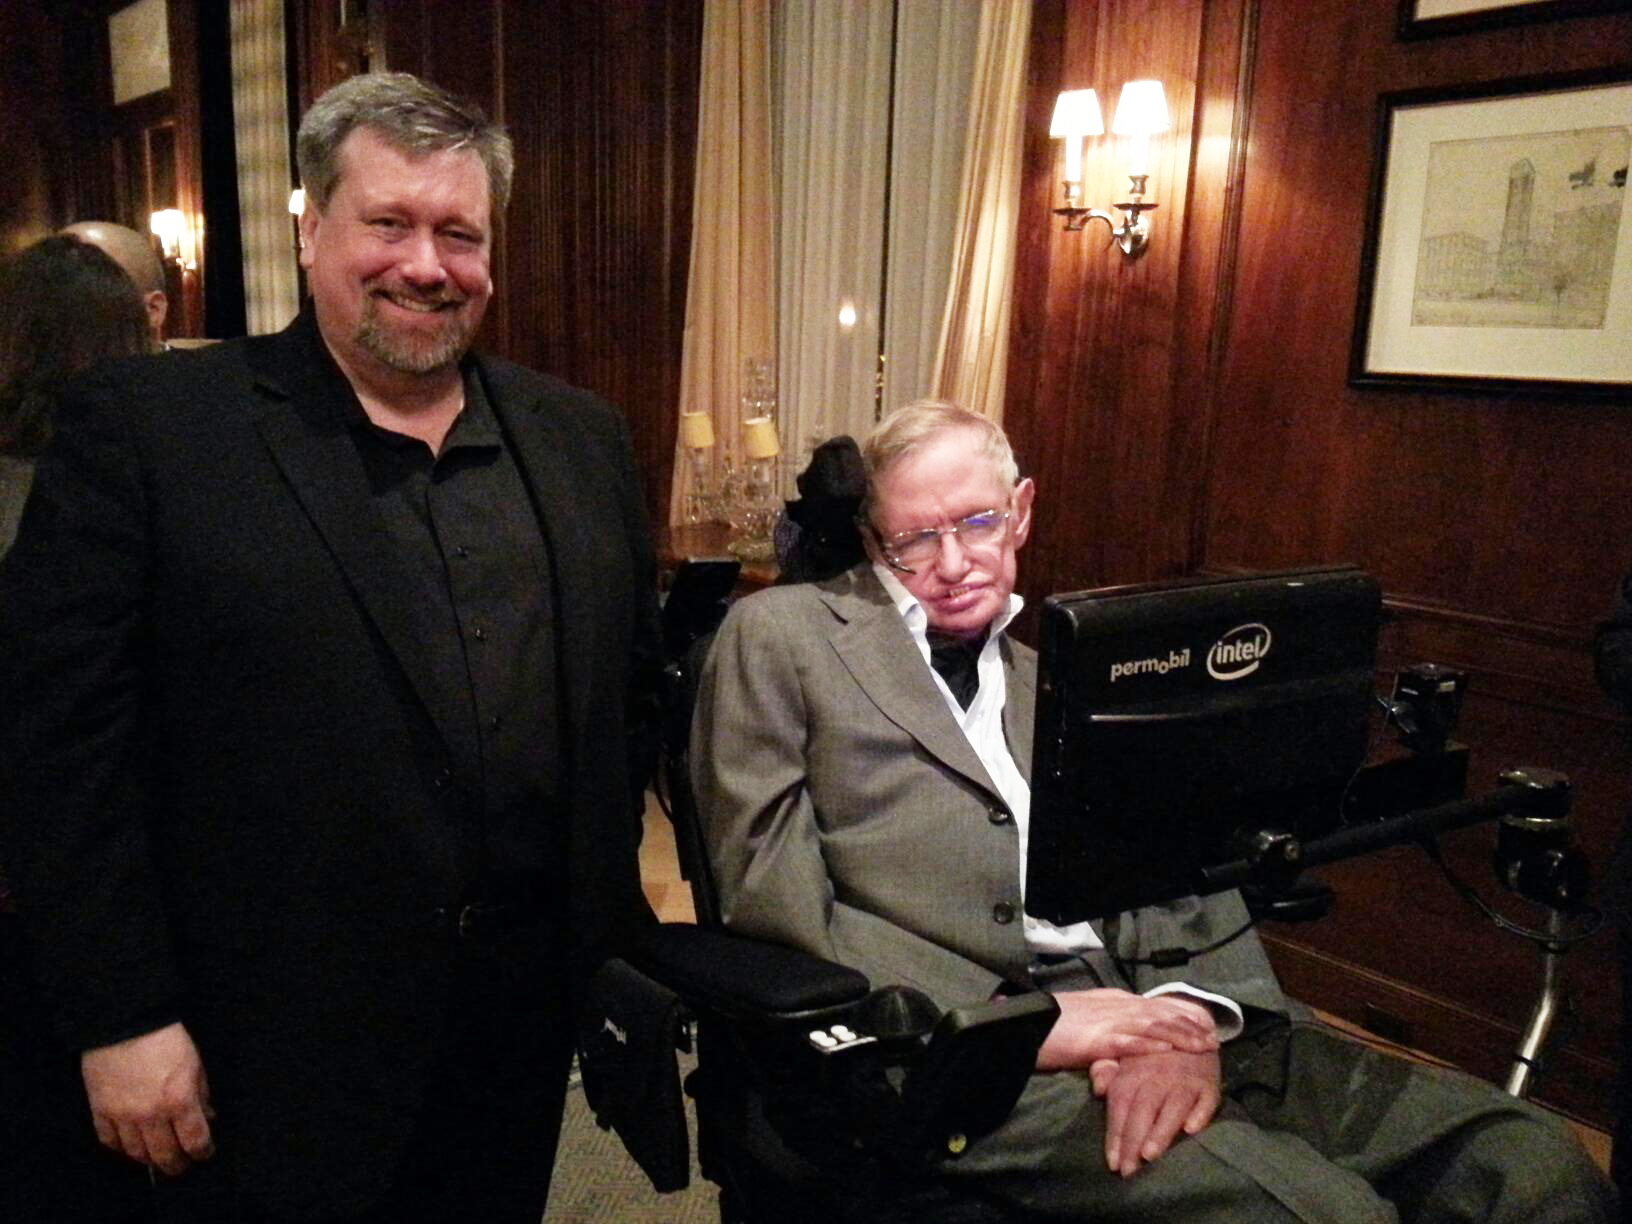 Peck and Hawking